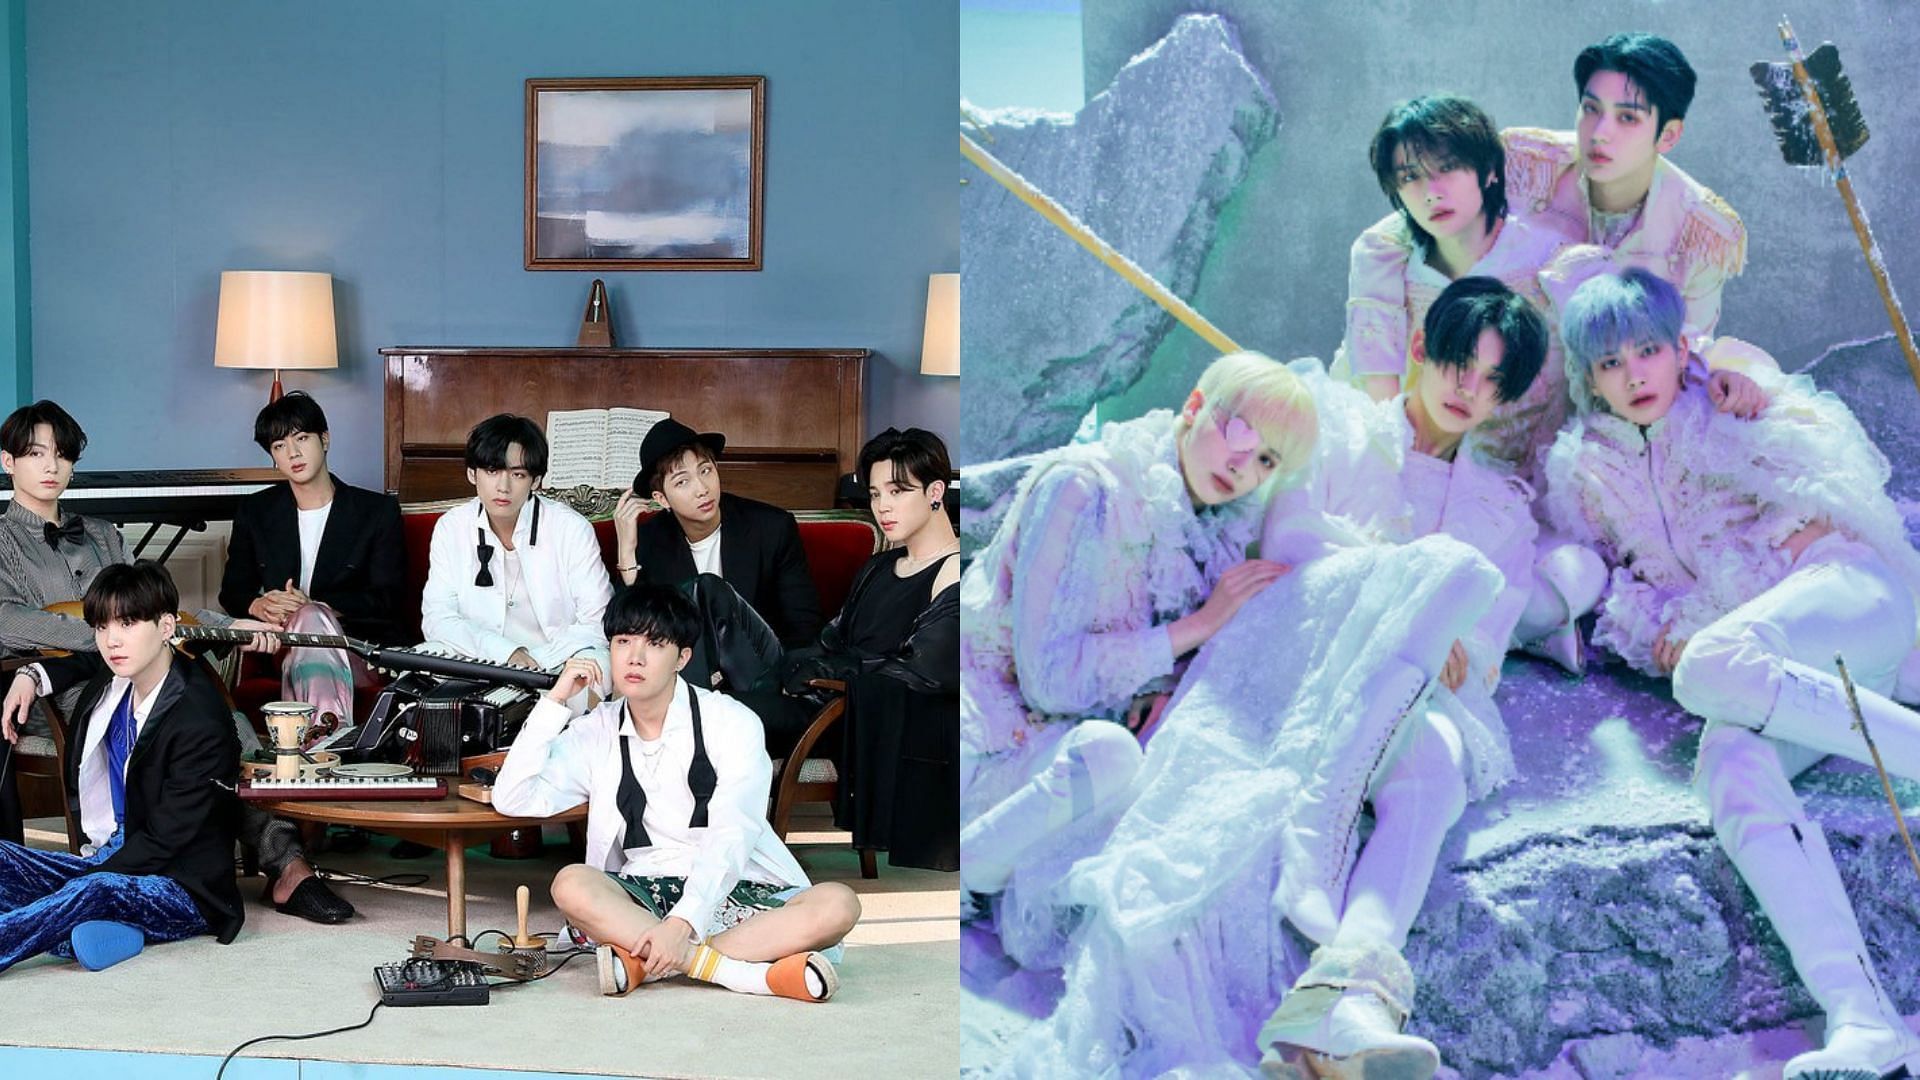 BTS and TOMORROW X TOGETHER to appear on &ldquo;&amp;AUDITION- The Howling&rdquo; (Image via BIG HIT MUSIC)